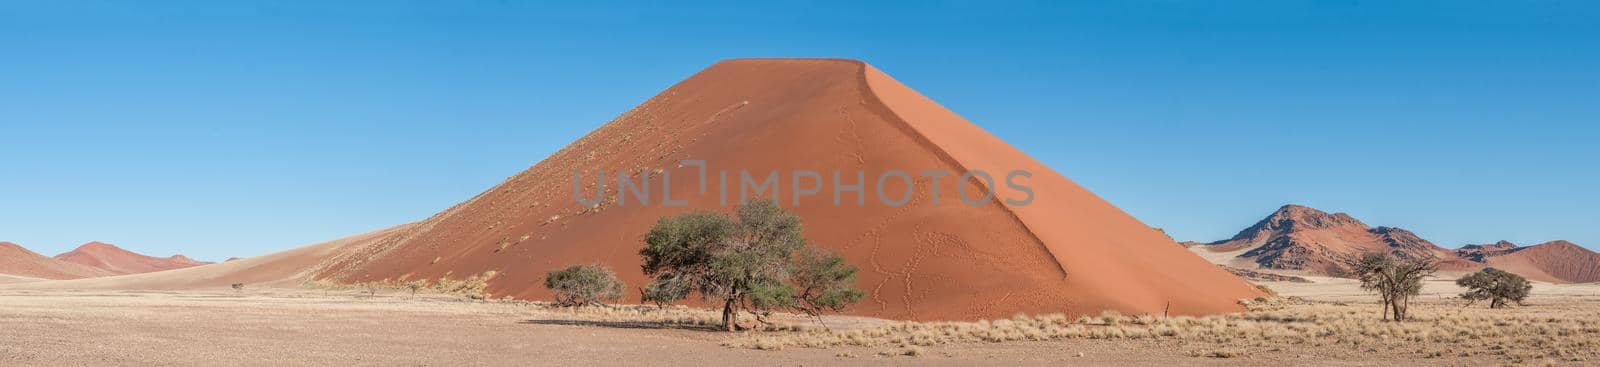 Panoramic dune landscape between Sesriem and Sossusvlei in Namibia. Trees are visible